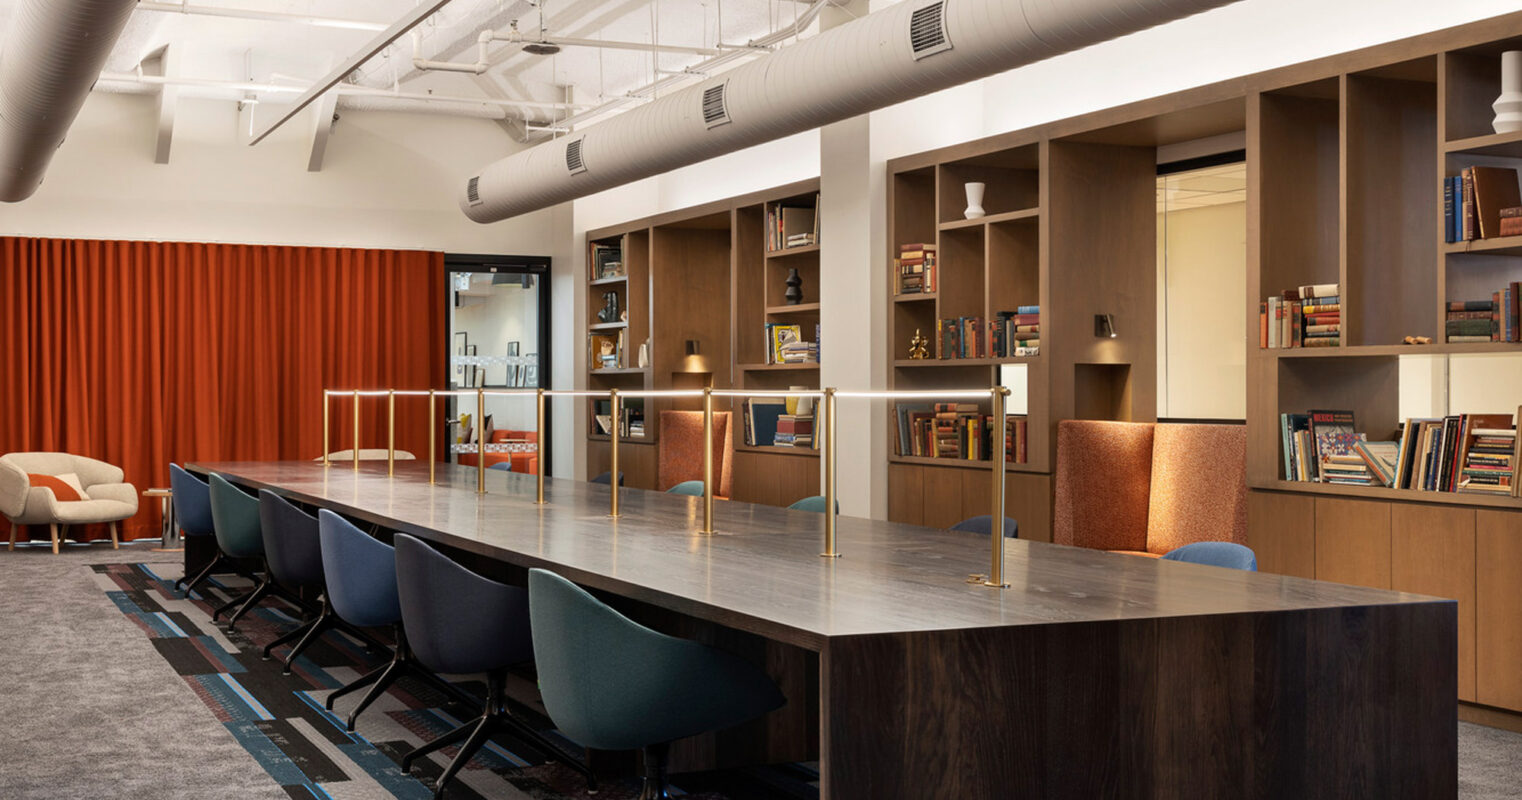 Modern office meeting area featuring exposed ceiling ductwork, a long dark wood table with teal chairs, a terracotta acoustic panel, and integrated shelving with decorative and informative literature, creating an industrial yet warm ambiance.